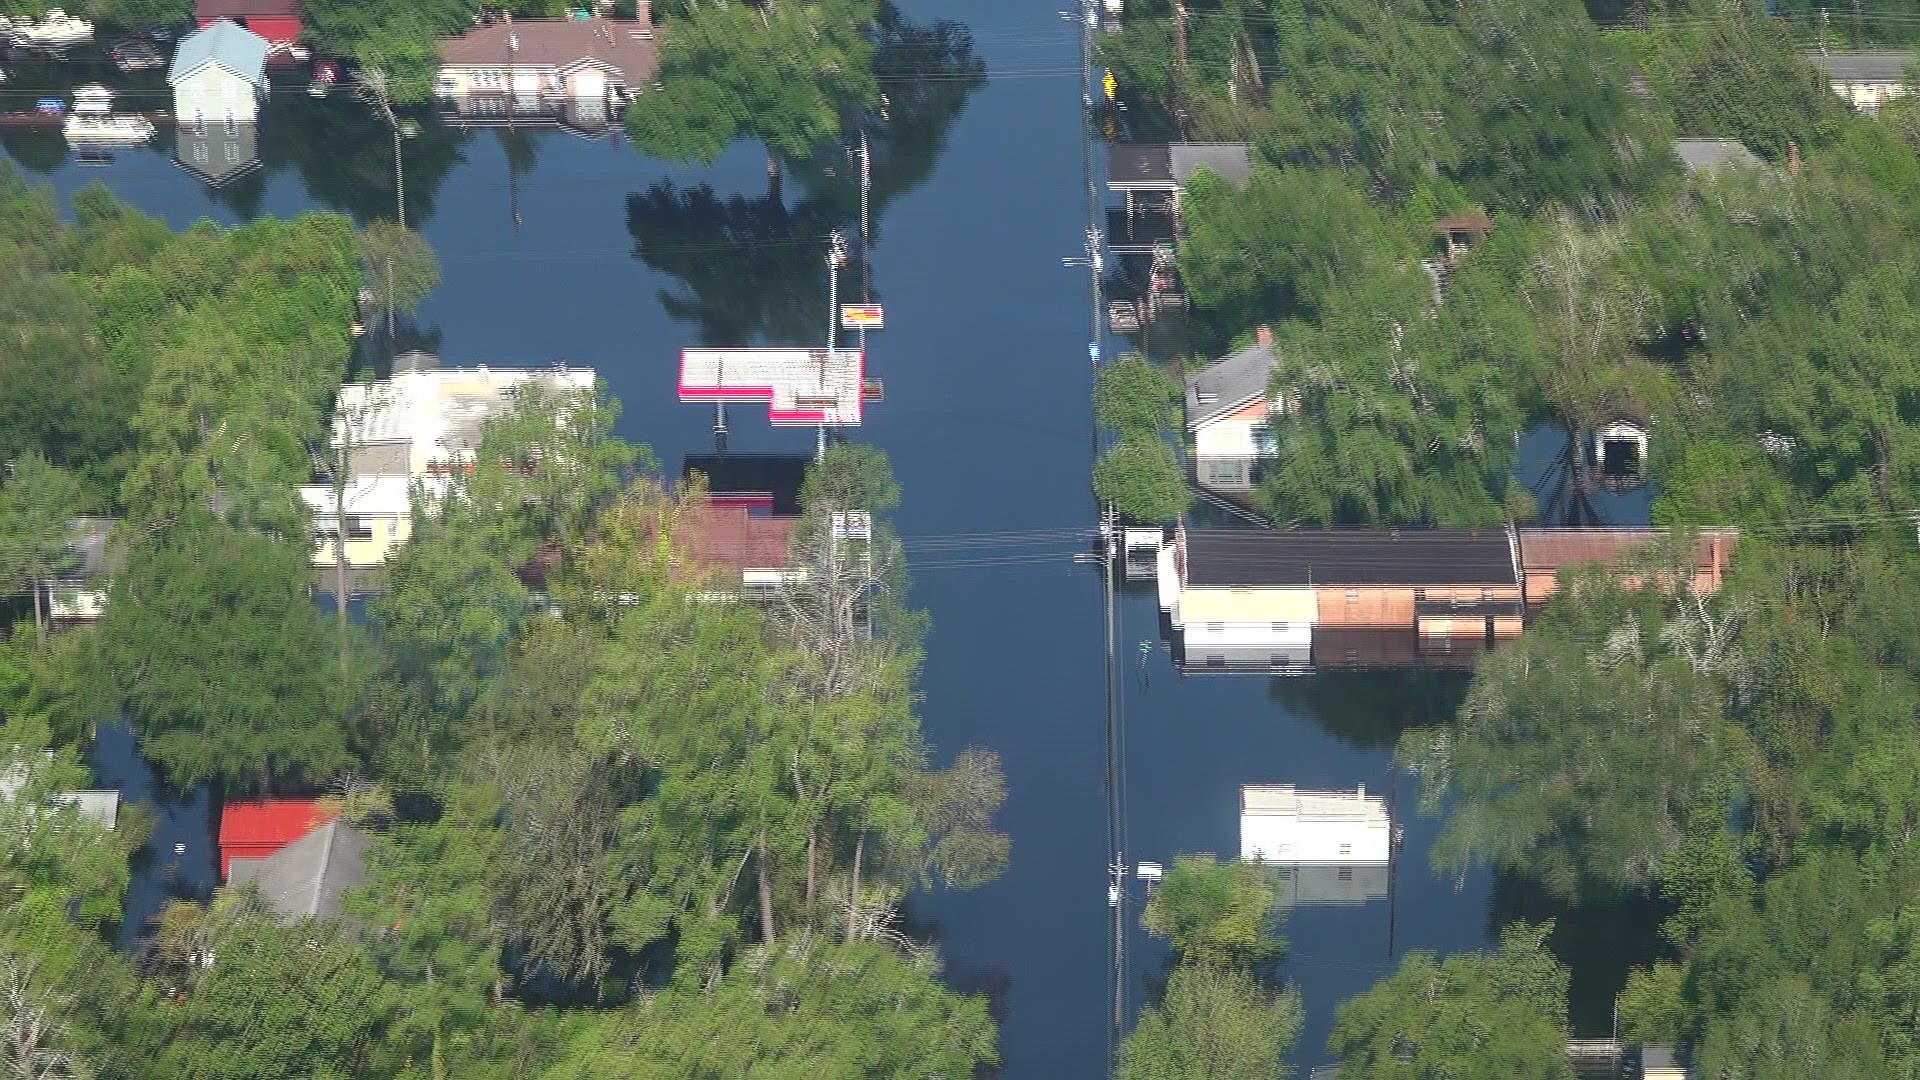 This video was taken by WLTX aboard a South Carolina National Guard chopper on Sept. 21, 2018. The chopper was surveying flooding caused by Hurricane Florence in the Pee Dee region of the state.